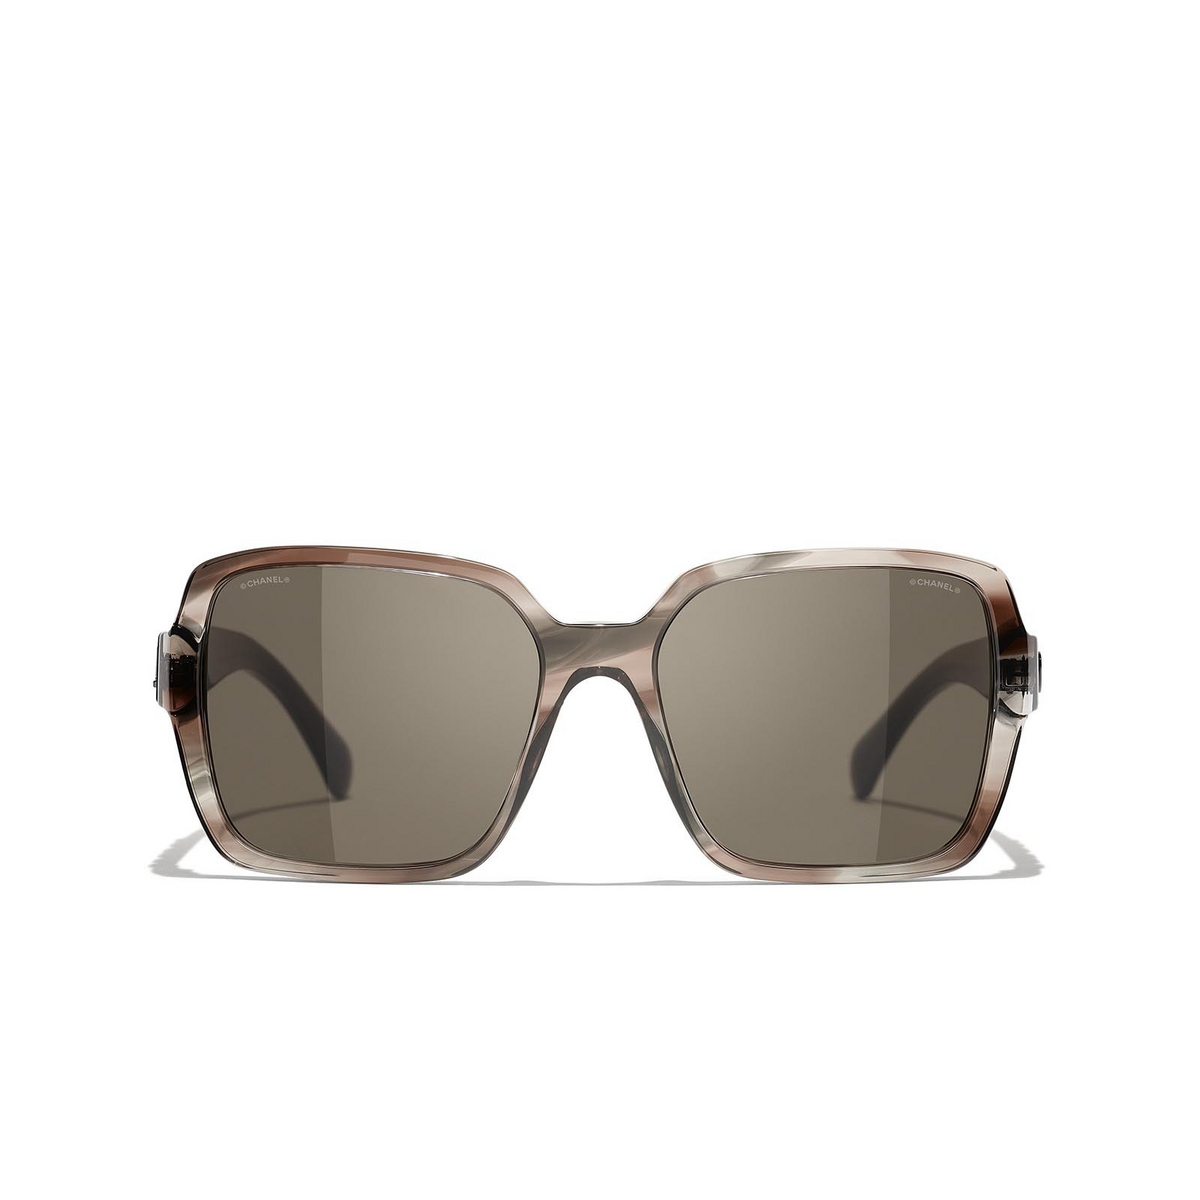 CHANEL square Sunglasses 1678/3 Brown - front view